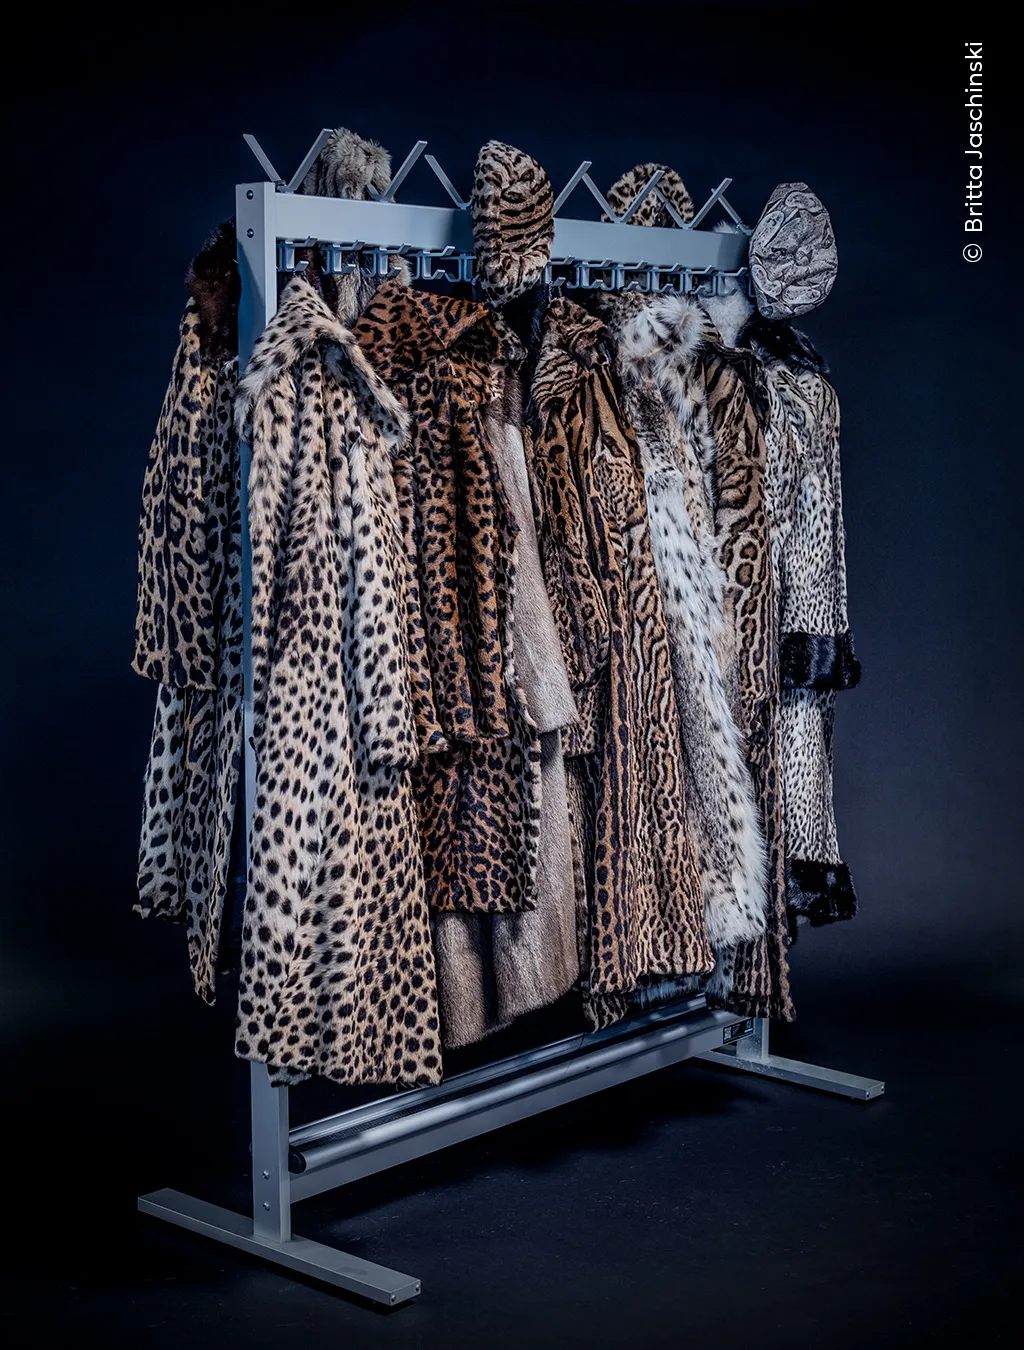 Coats made from wild cat pelts on a hanger in a dark room